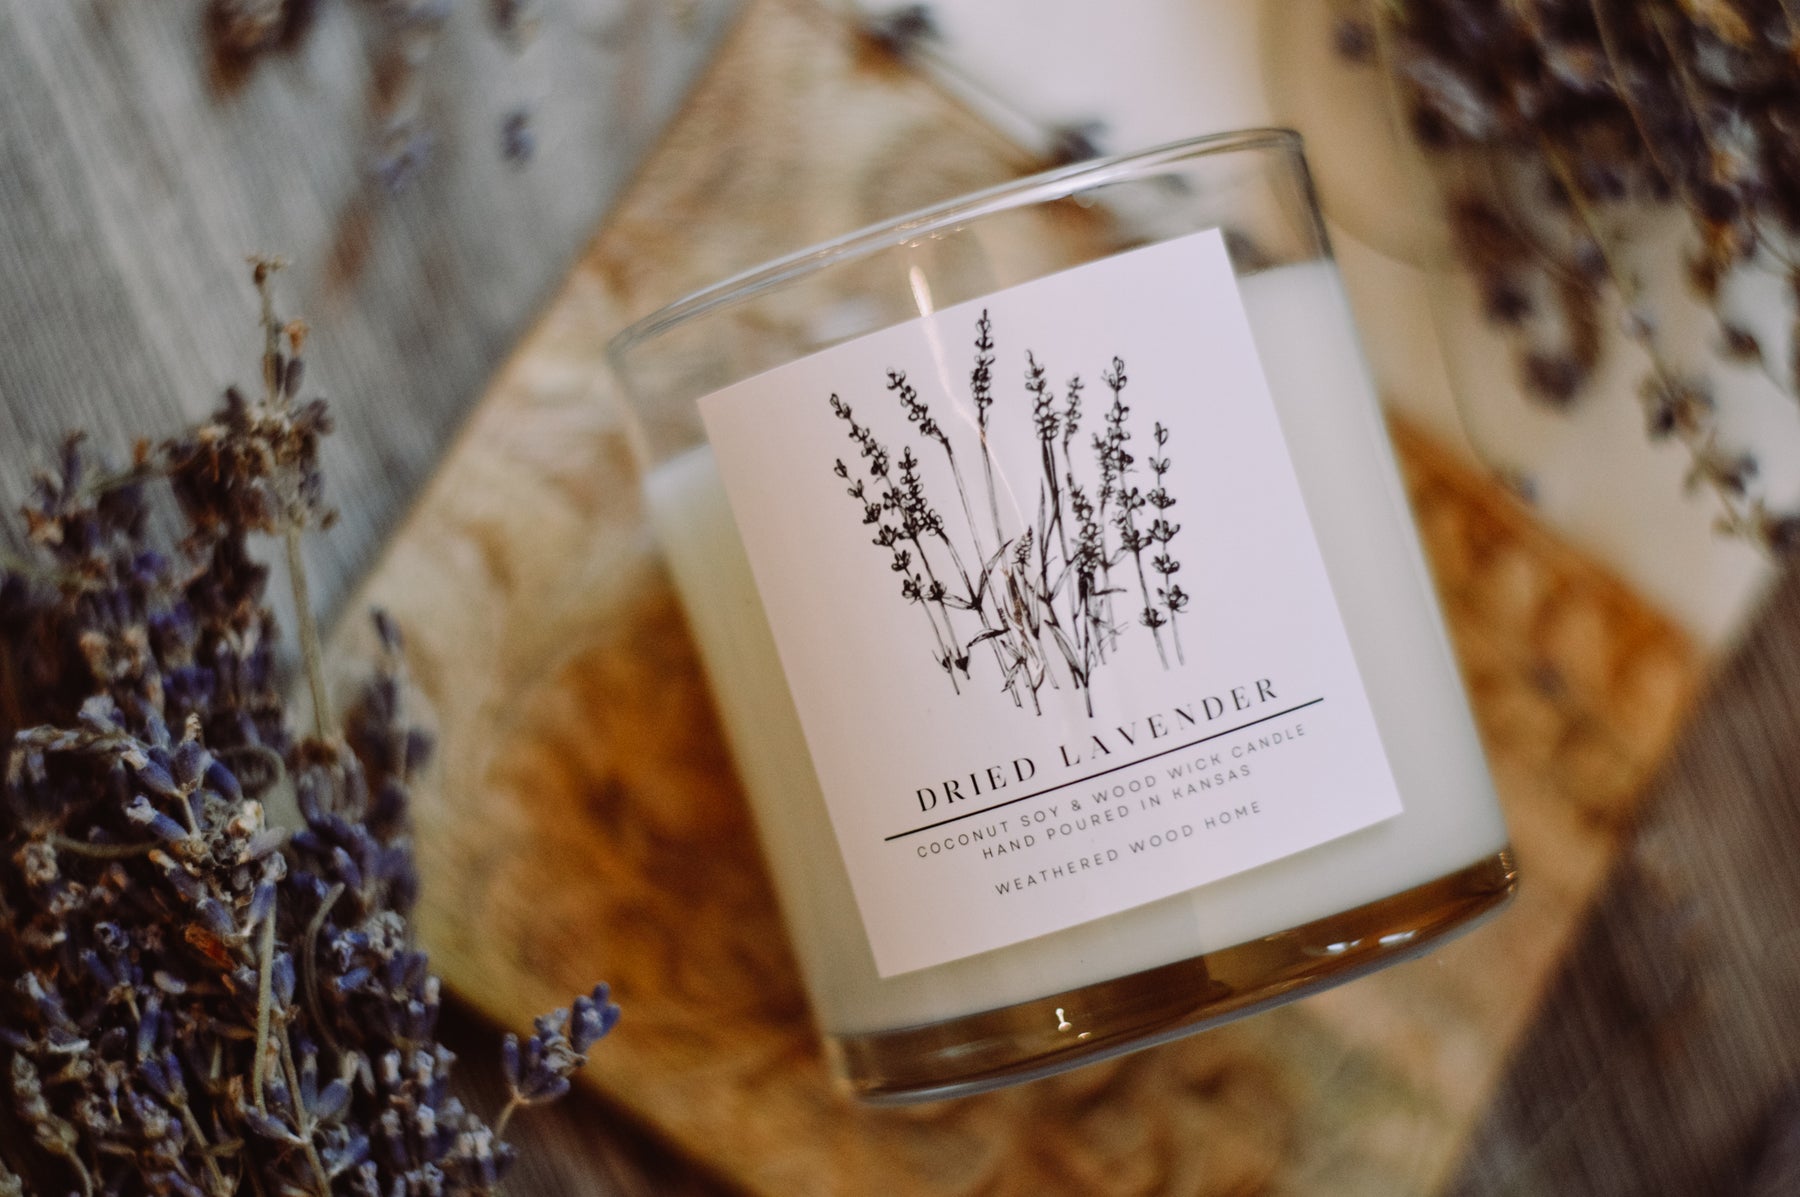 Palo Santo Lavender Soy Candle, Crackling Wooden Wick Candle